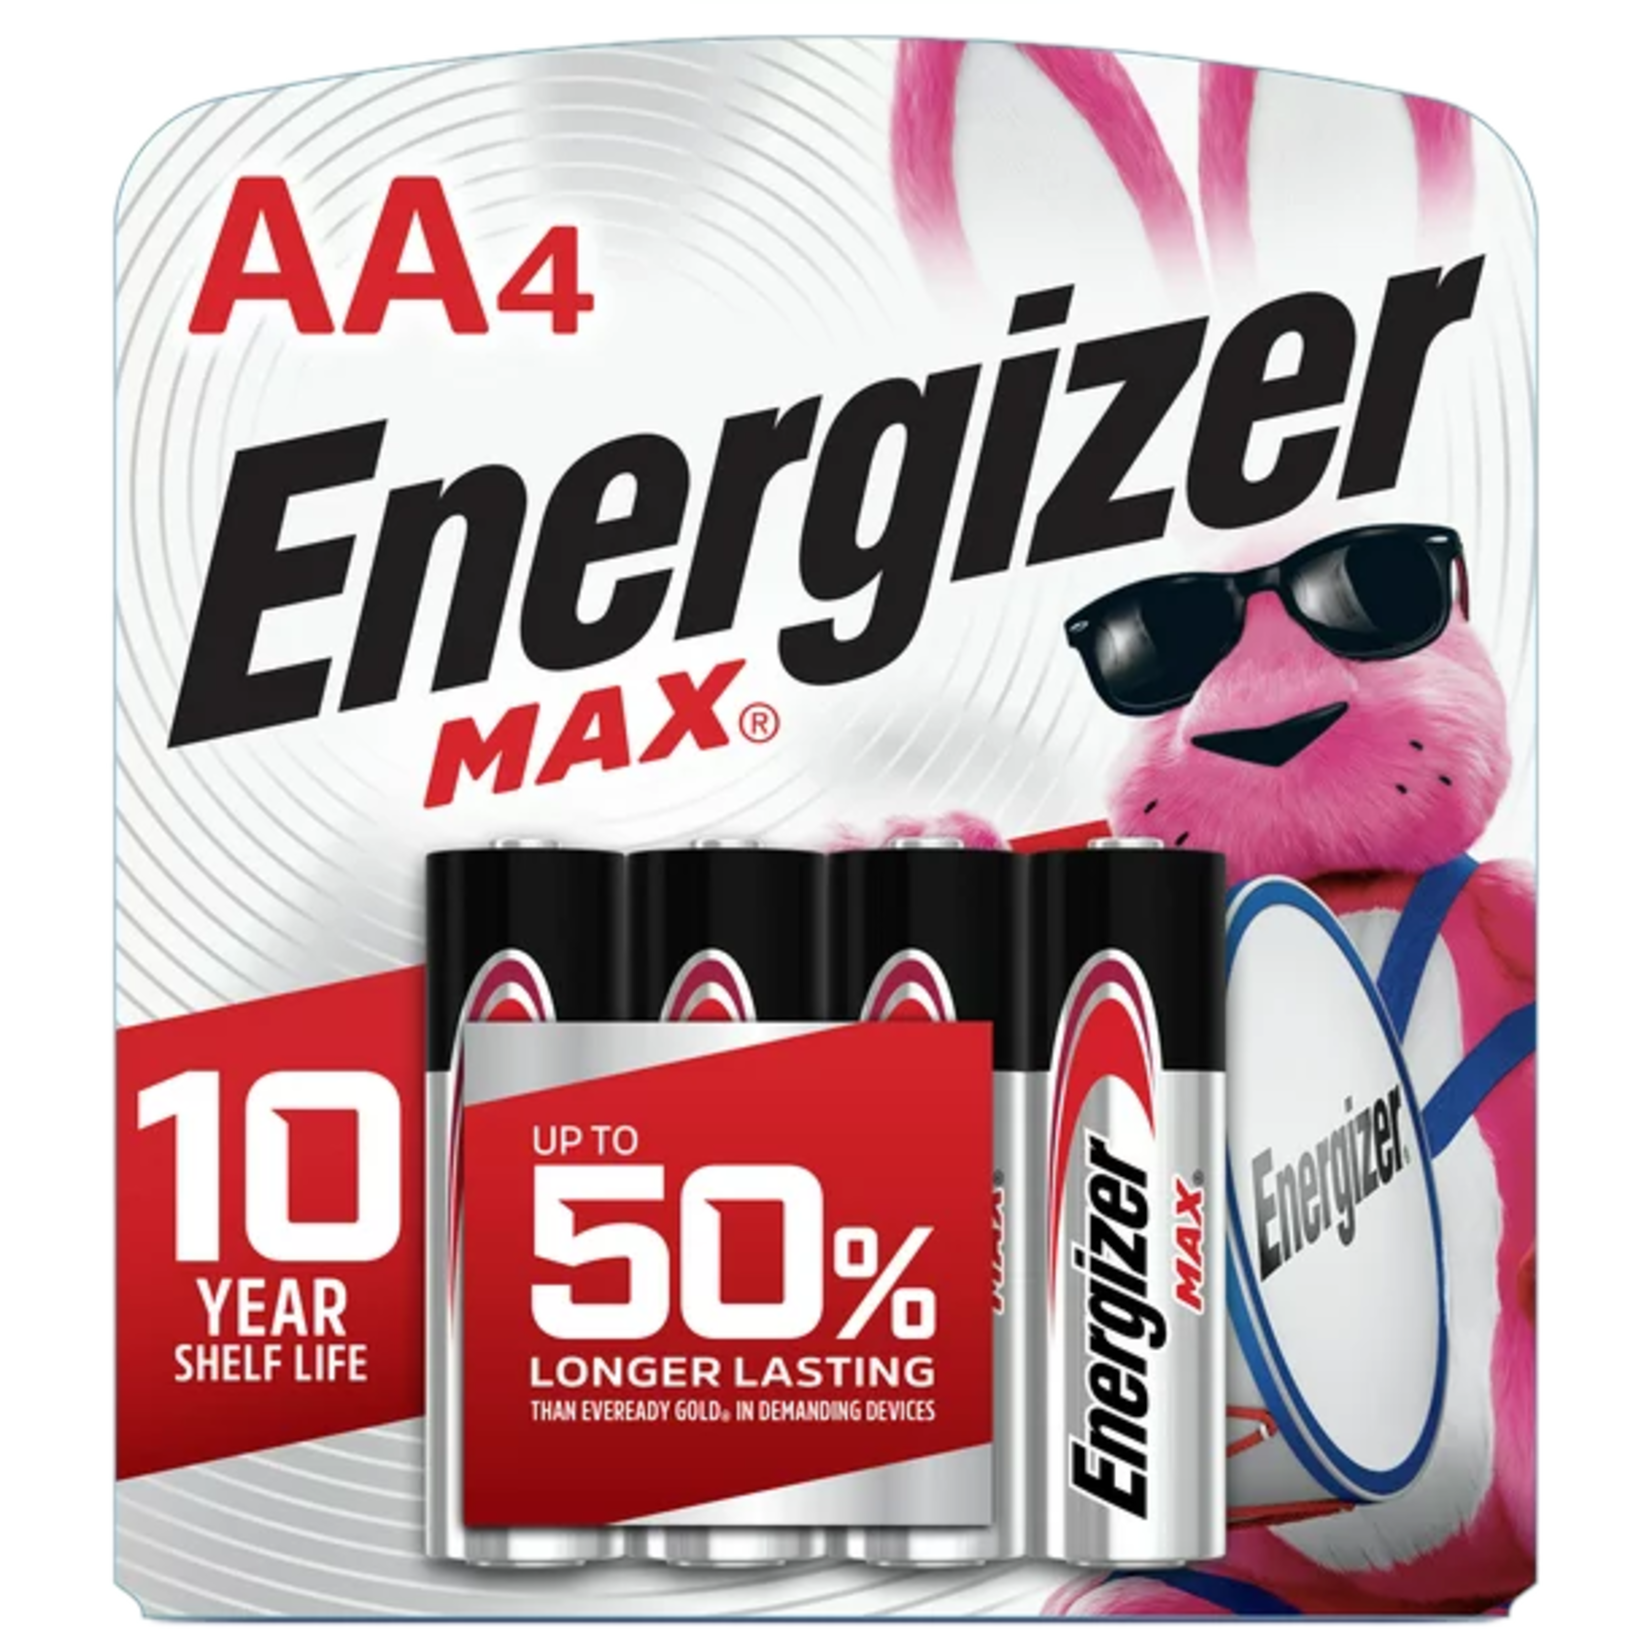 Energizer Battery 4's AA